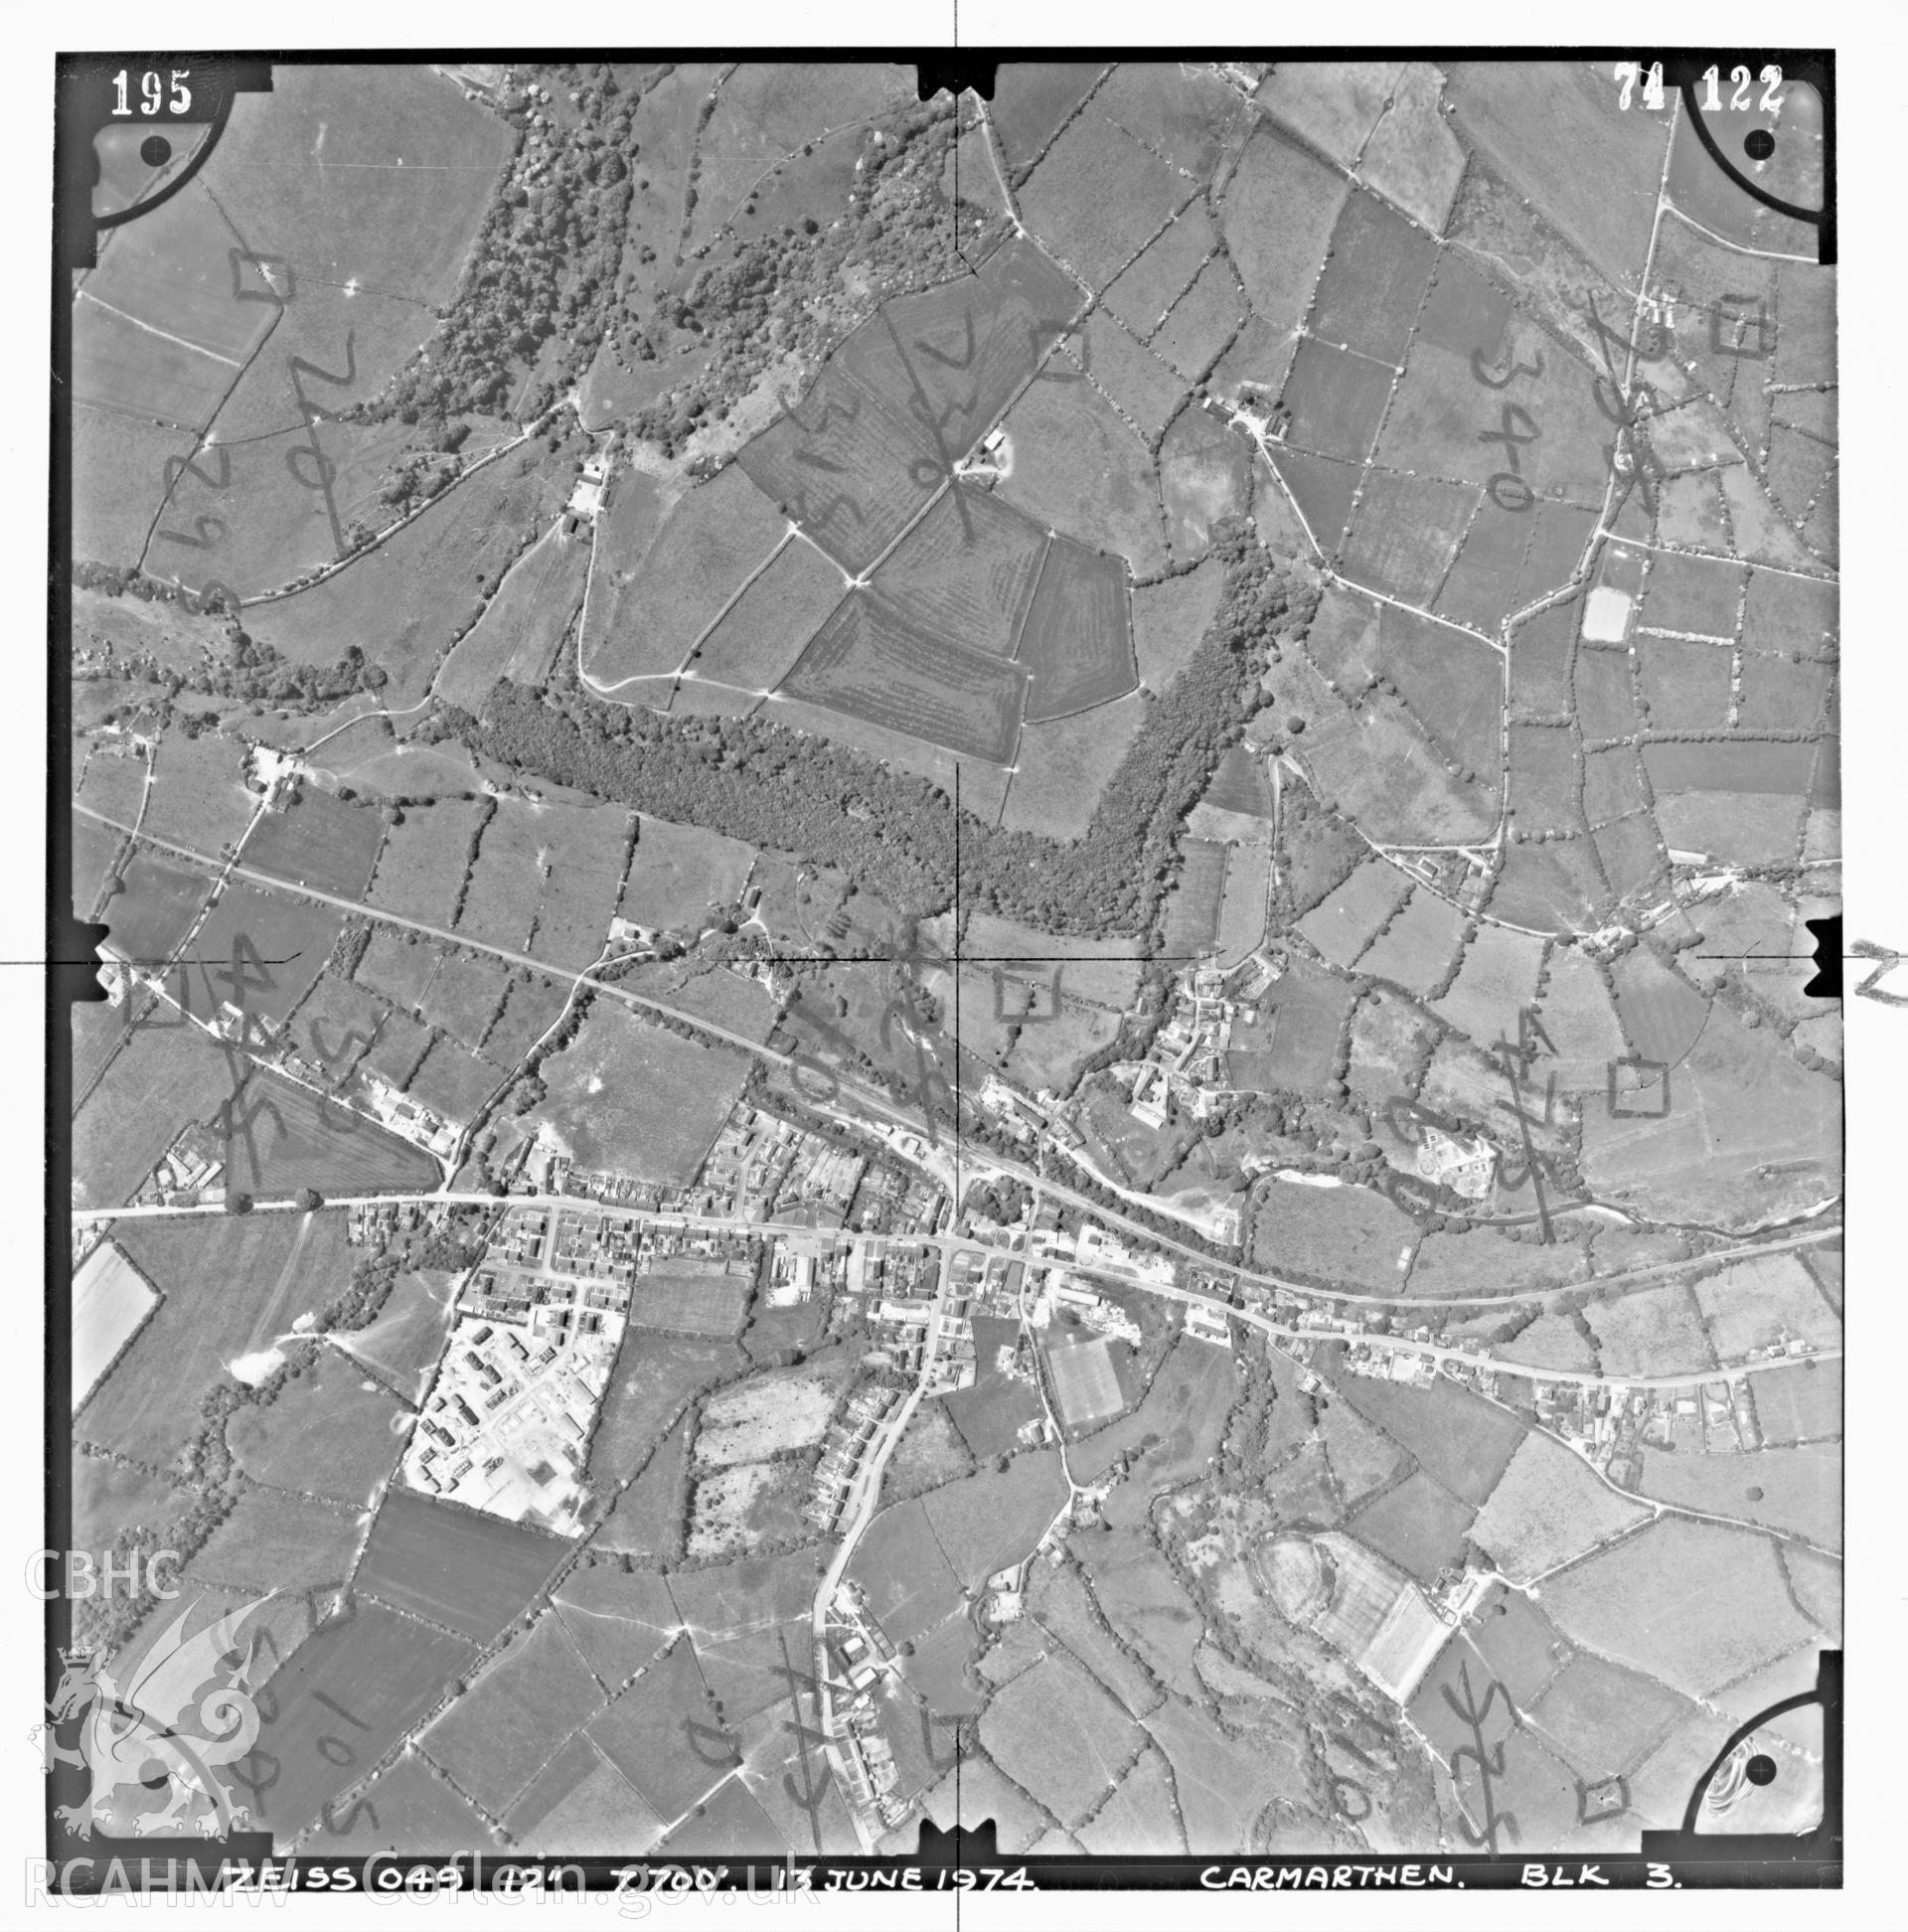 Digitized copy of an aerial photograph showing the Pencader area, taken by Ordnance Survey, 1974.